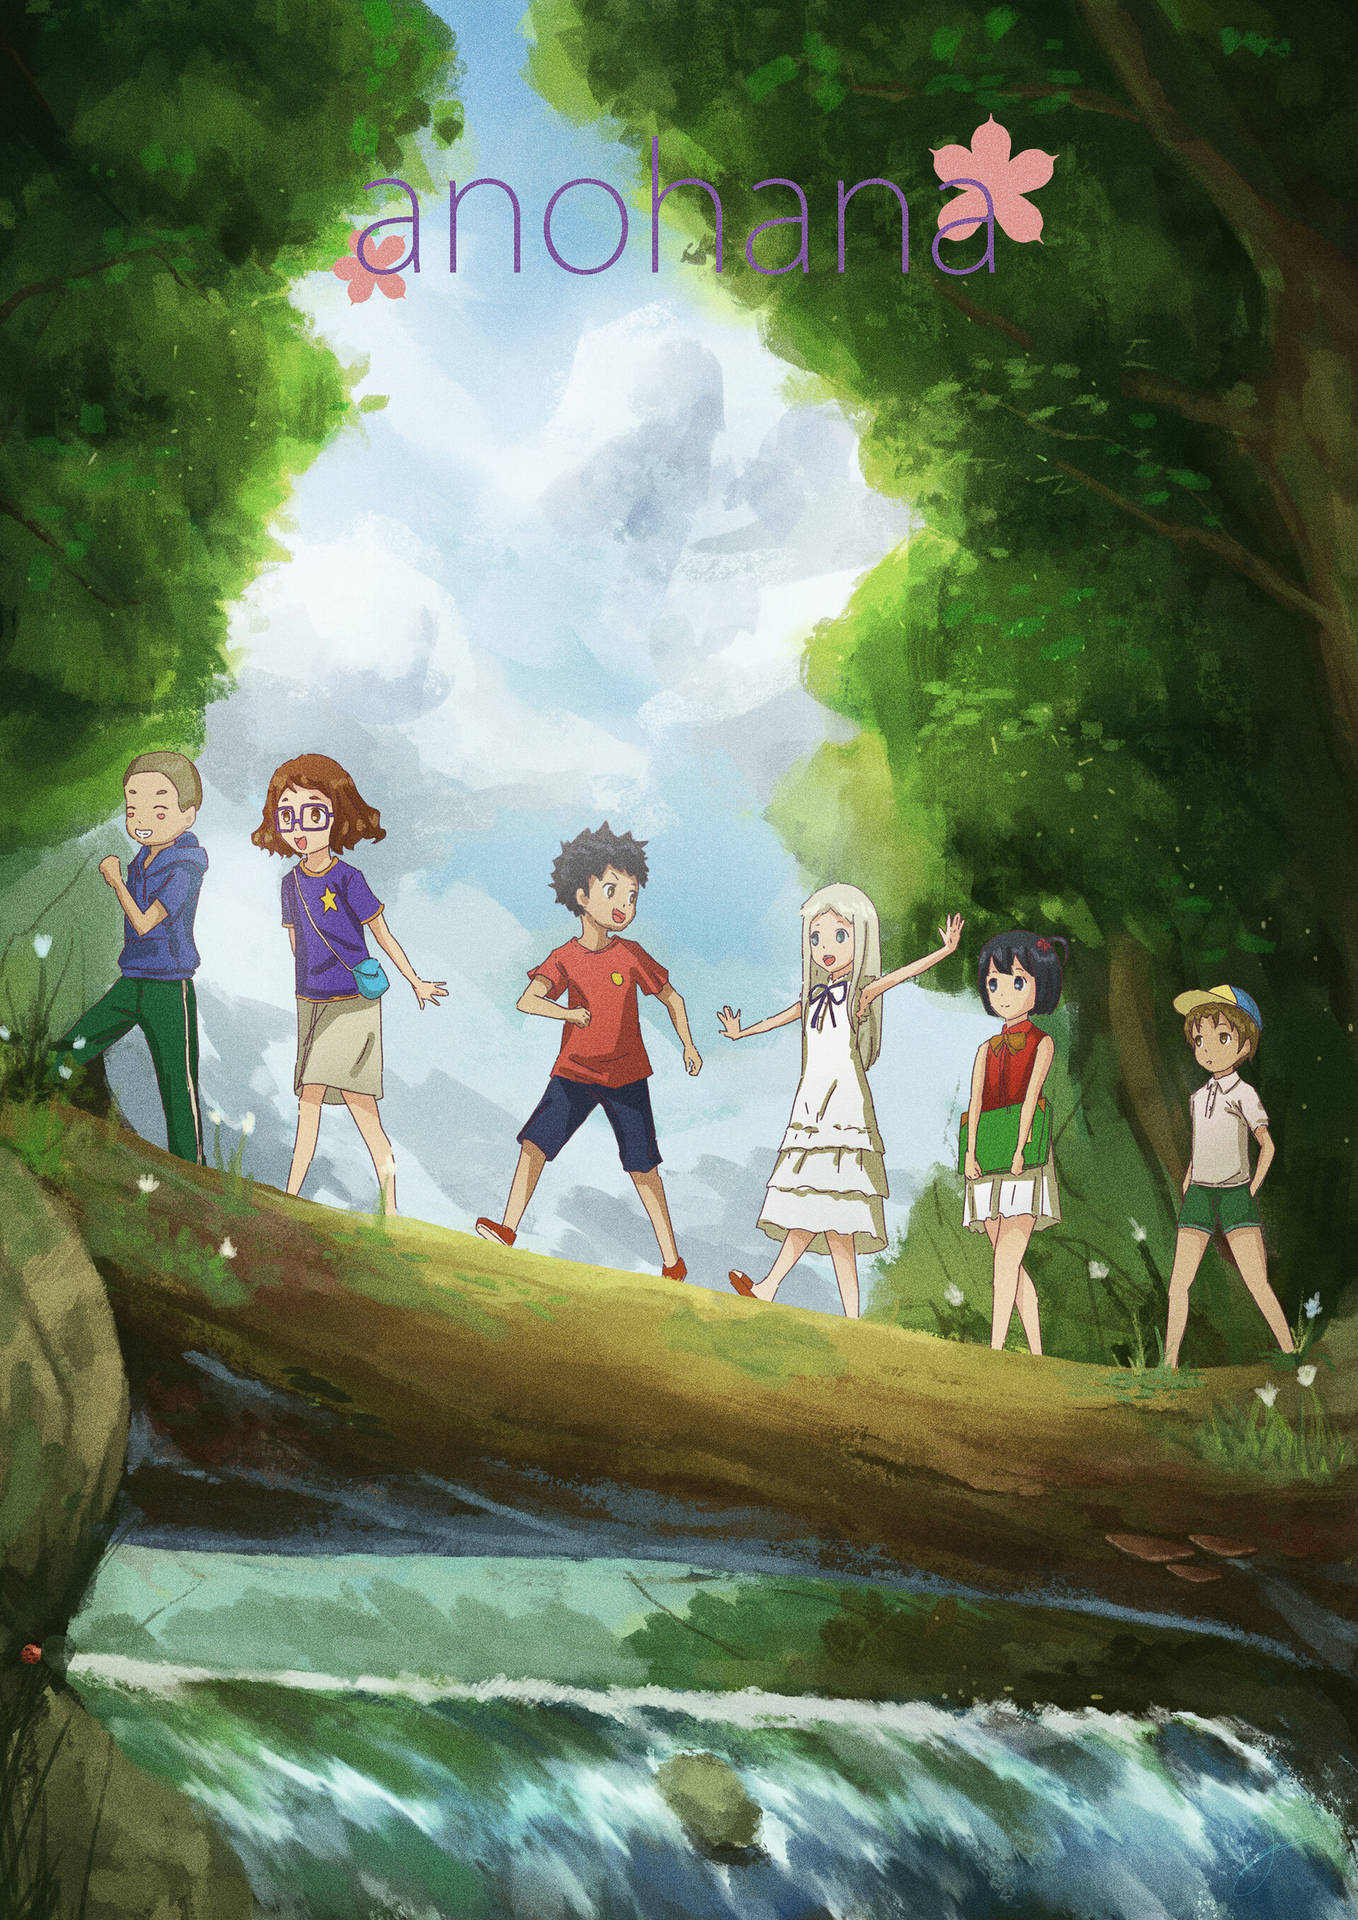 Anohana Characters: A Moment Of Friendship Background